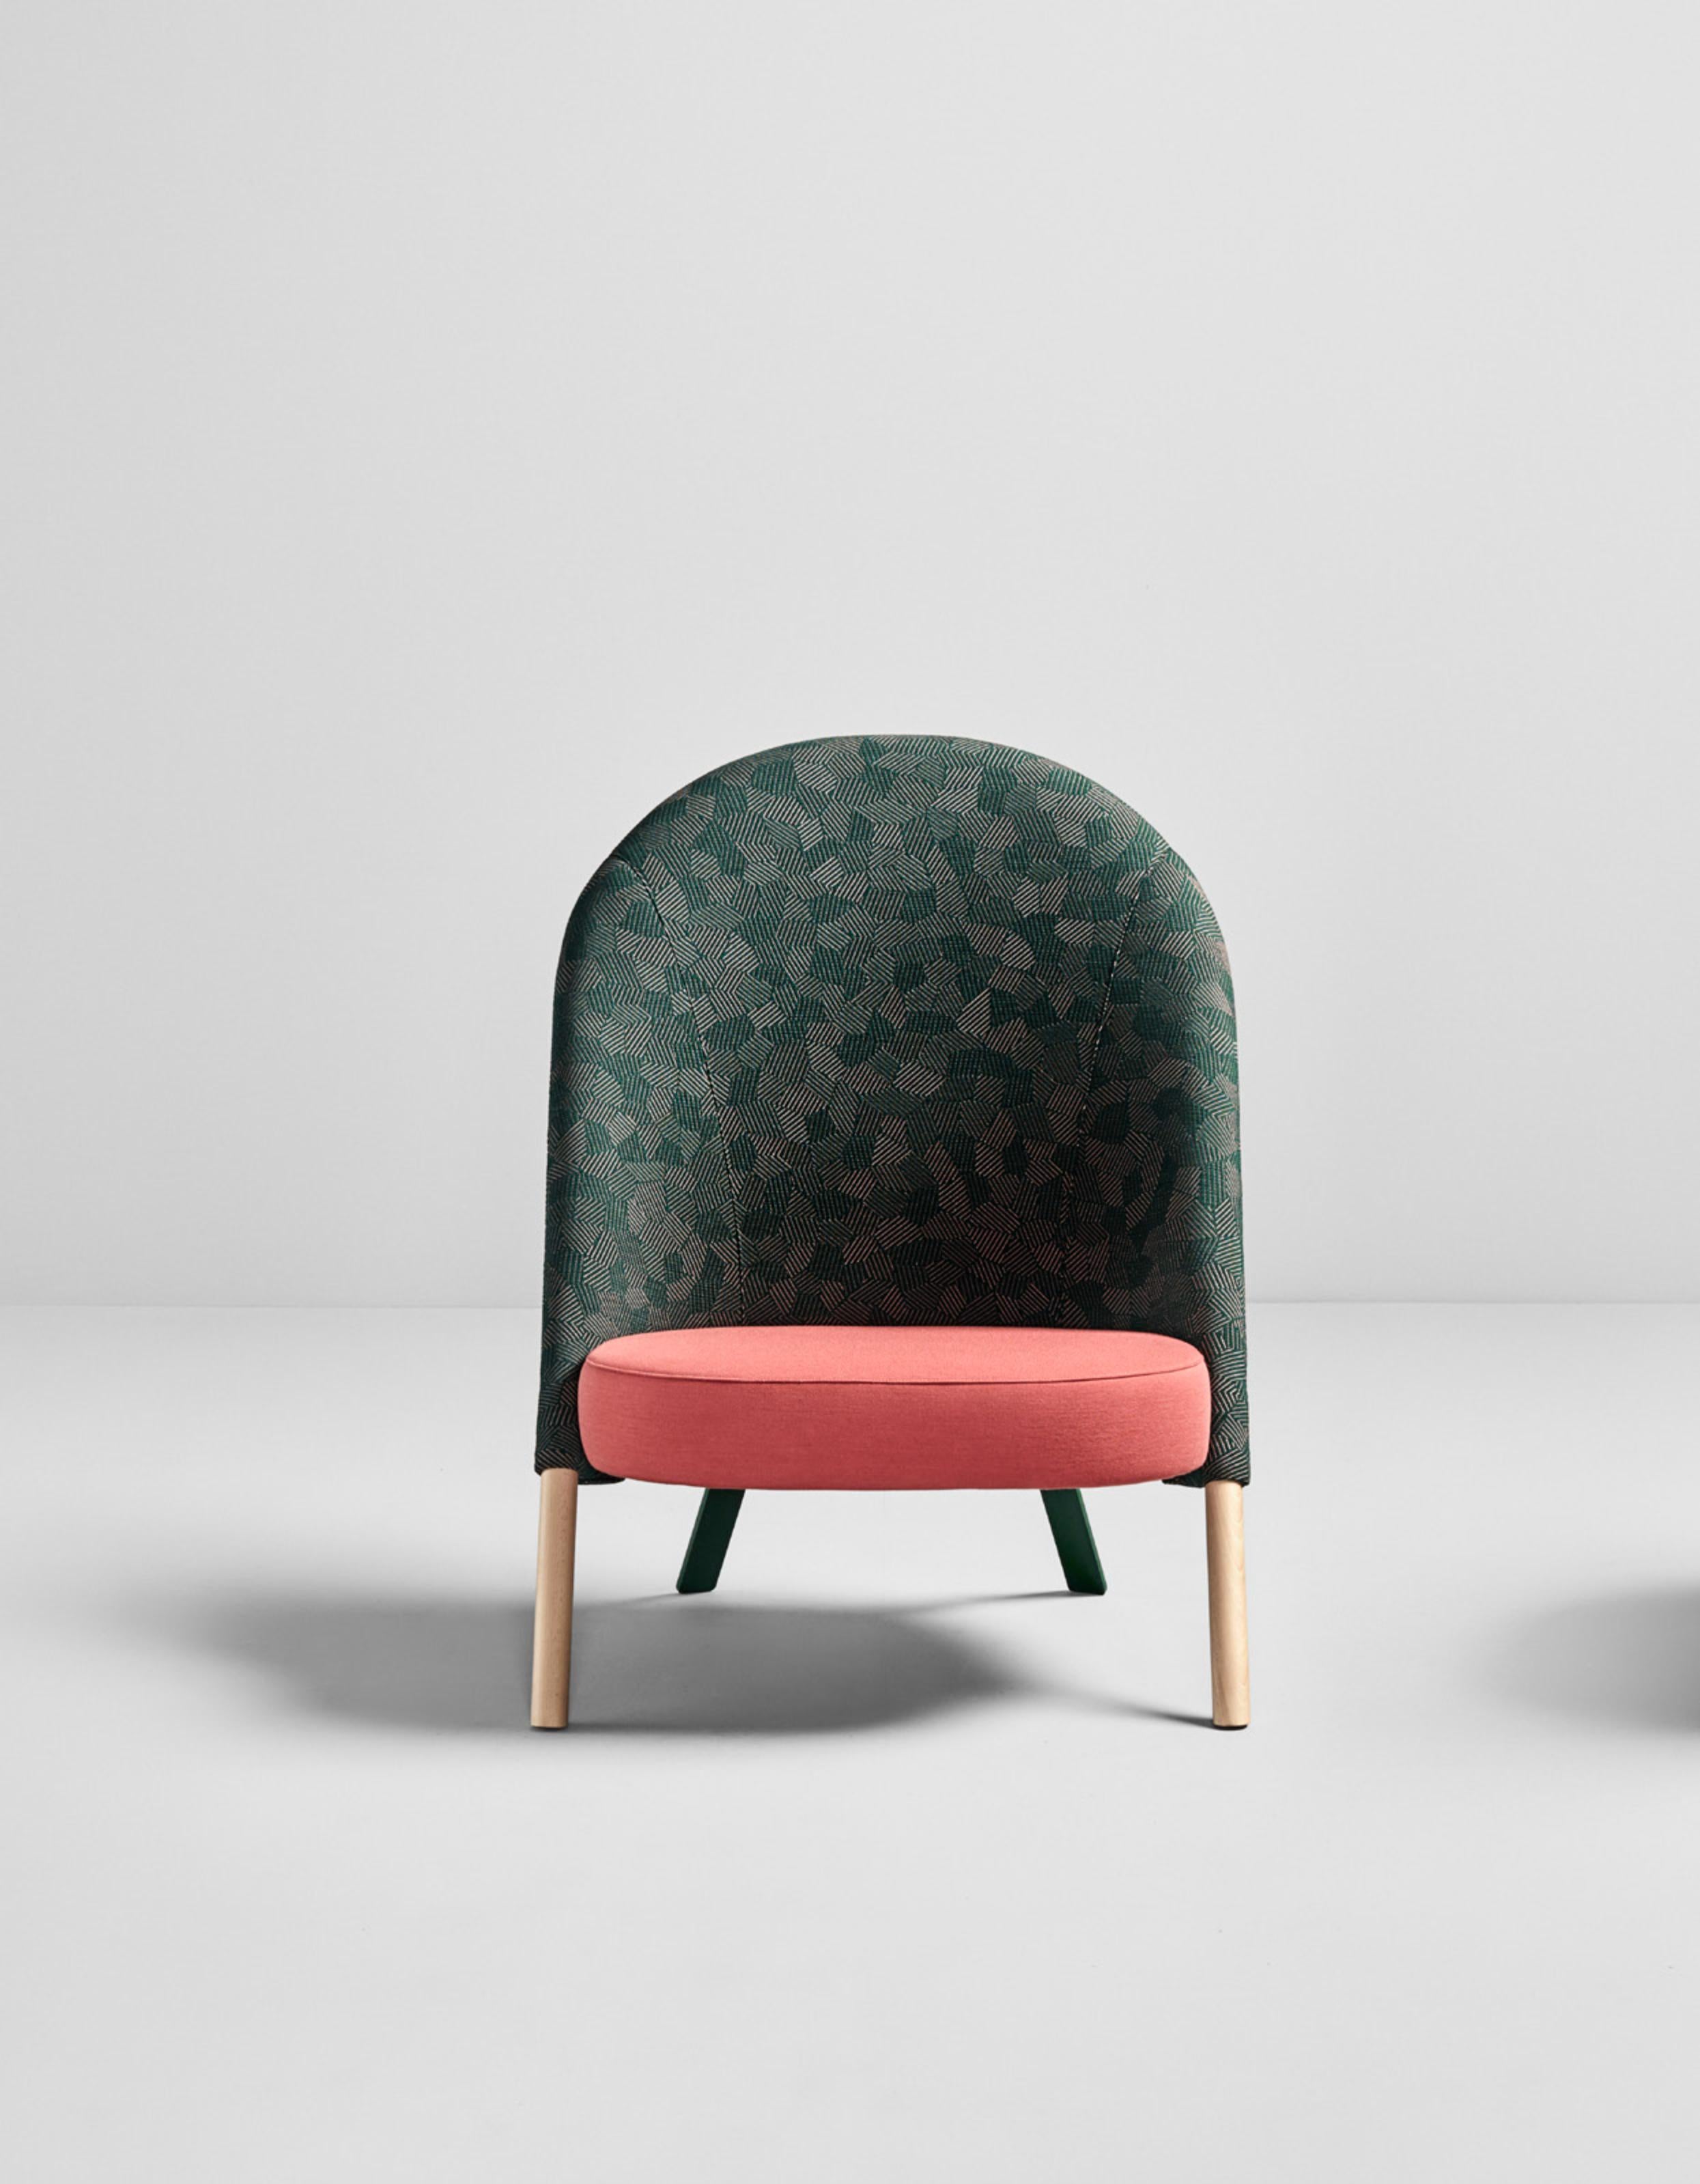 Okapi armchair by PerezOchando
Dimensions: width 76 -depth 74 - height 102 - seat 40 cm
Materials: Iron structure with plywood and tablex.
Foam CMHR (high resilience and flame retardant) for all our cushion filling systems.
Lacquered beech wood